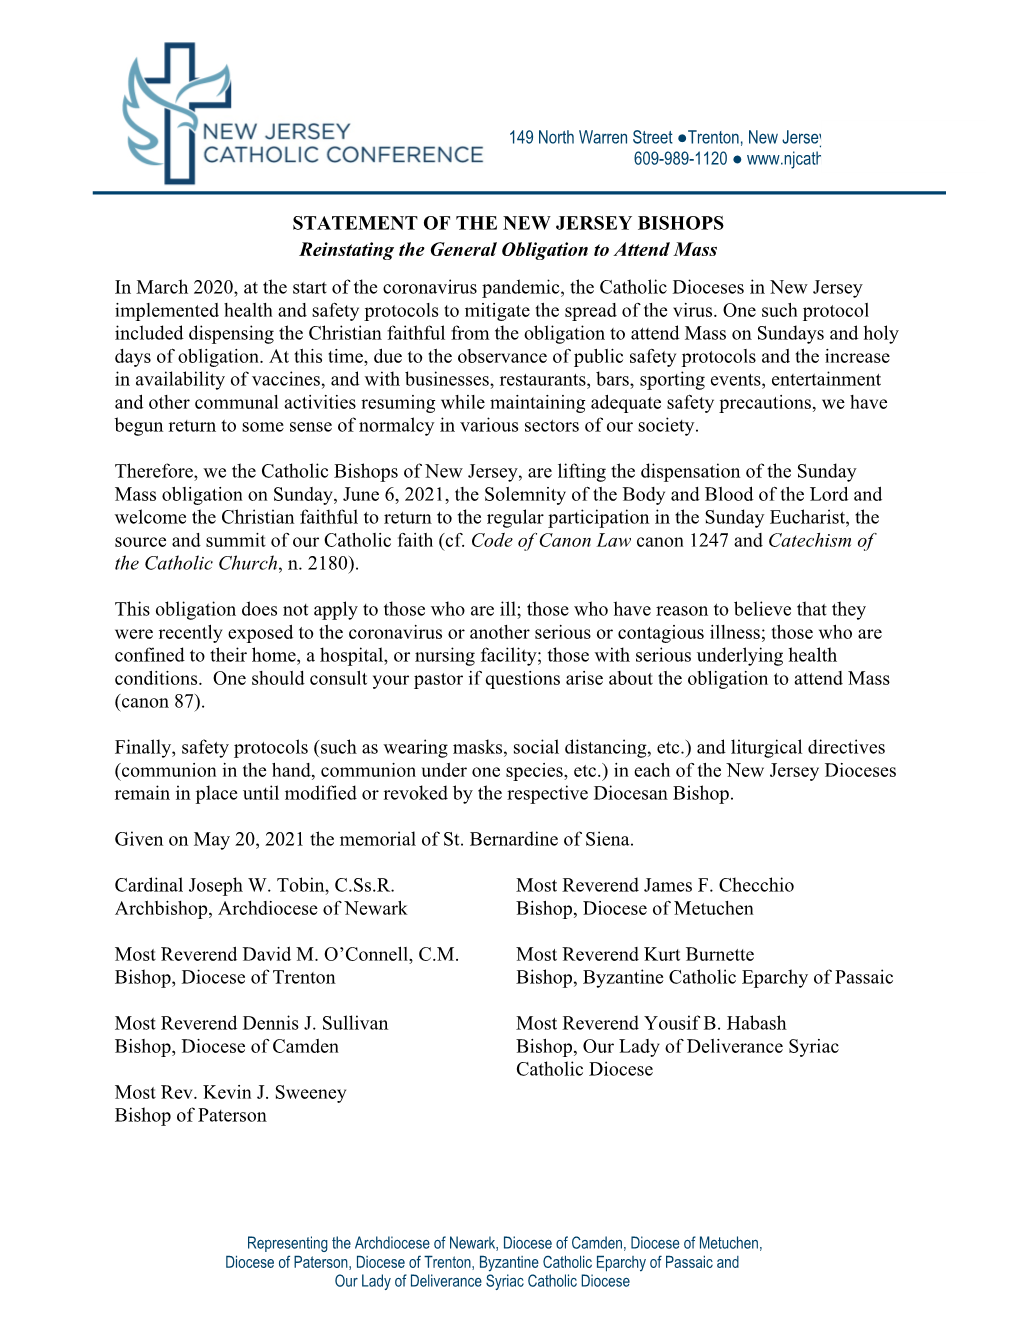 STATEMENT of the NEW JERSEY BISHOPS Reinstating the General Obligation to Attend Mass in March 2020, at the Start of the Coronav